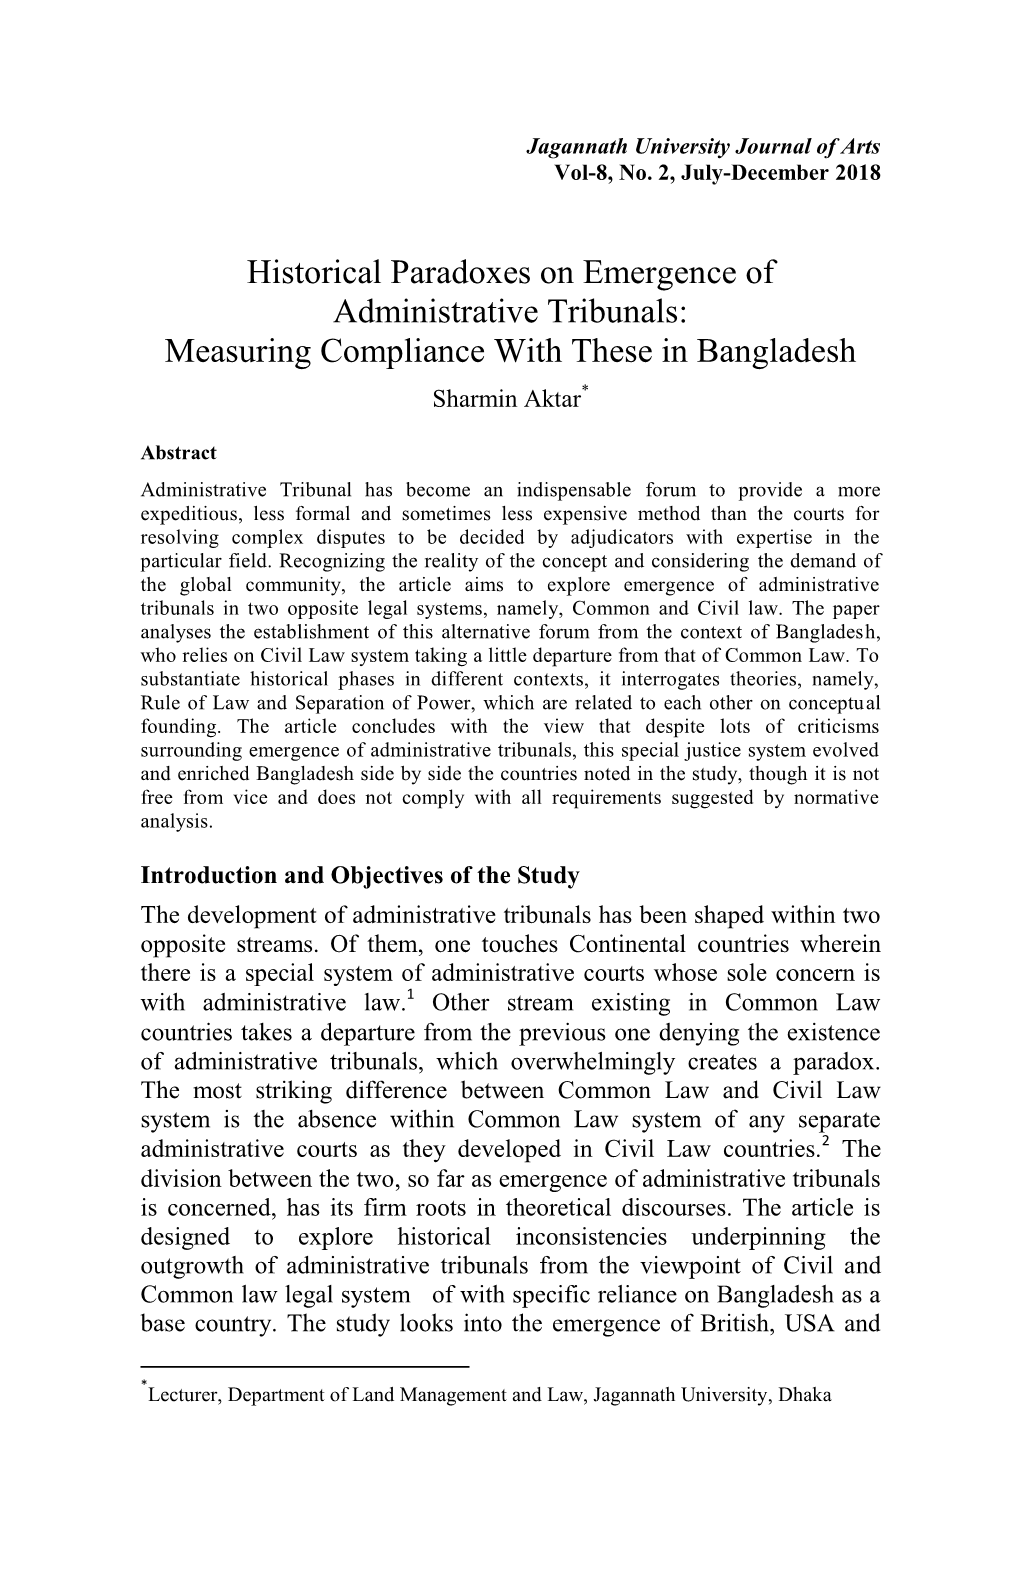 Historical Paradoxes on Emergence of Administrative Tribunals: Measuring Compliance with These in Bangladesh Sharmin Aktar*